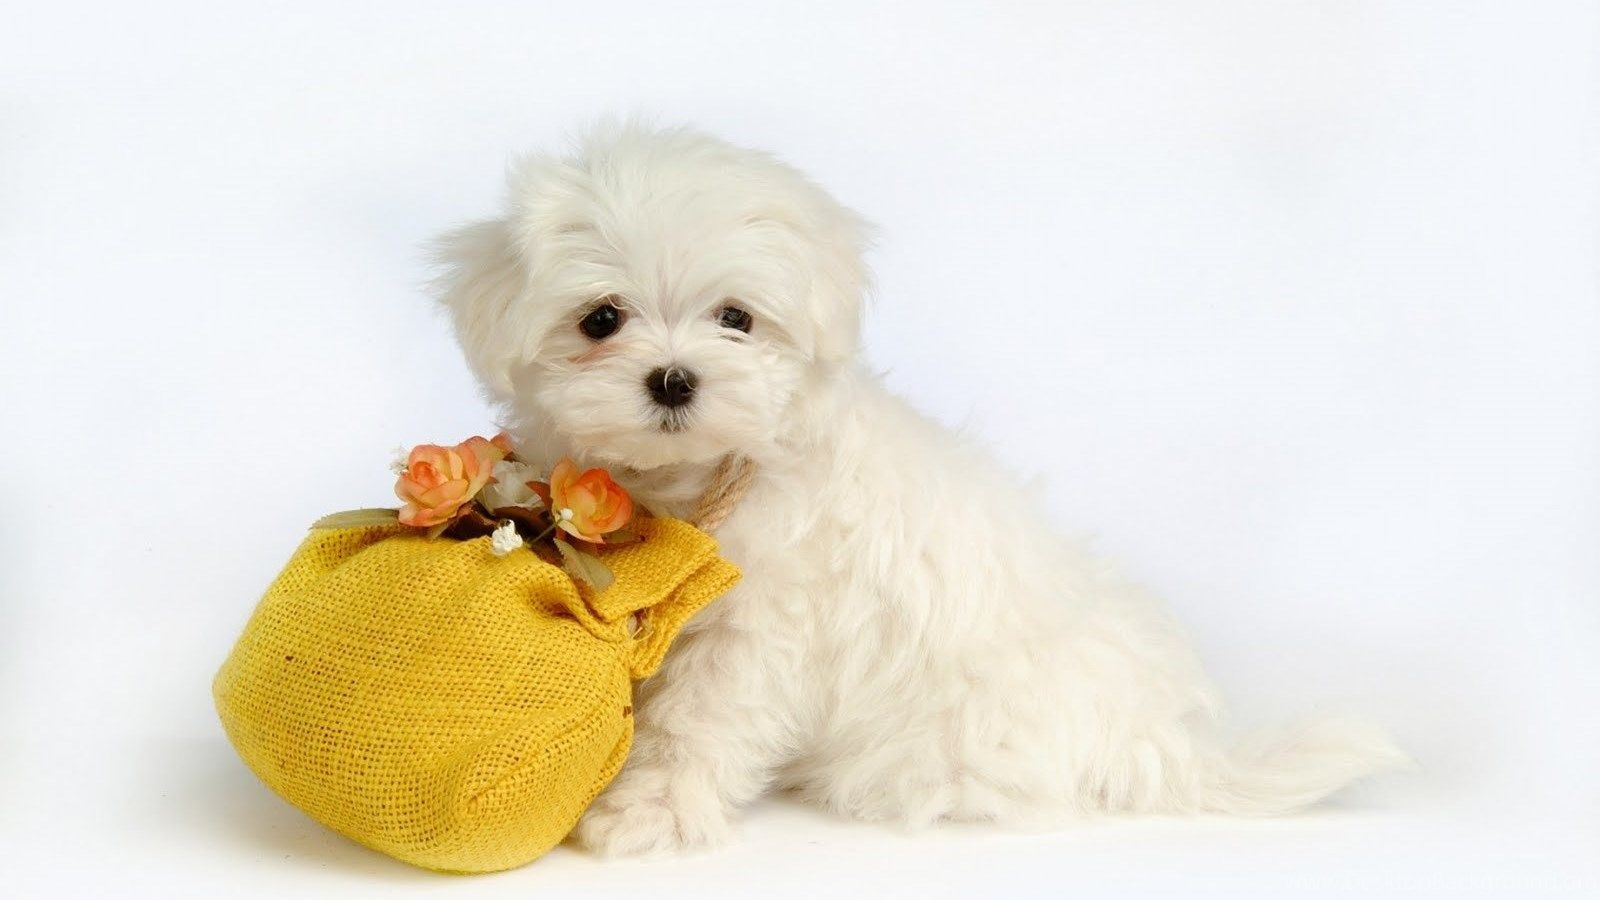 Cute Puppies Wallpaper For Halloween HD Funny Puppy Background. Desktop Background